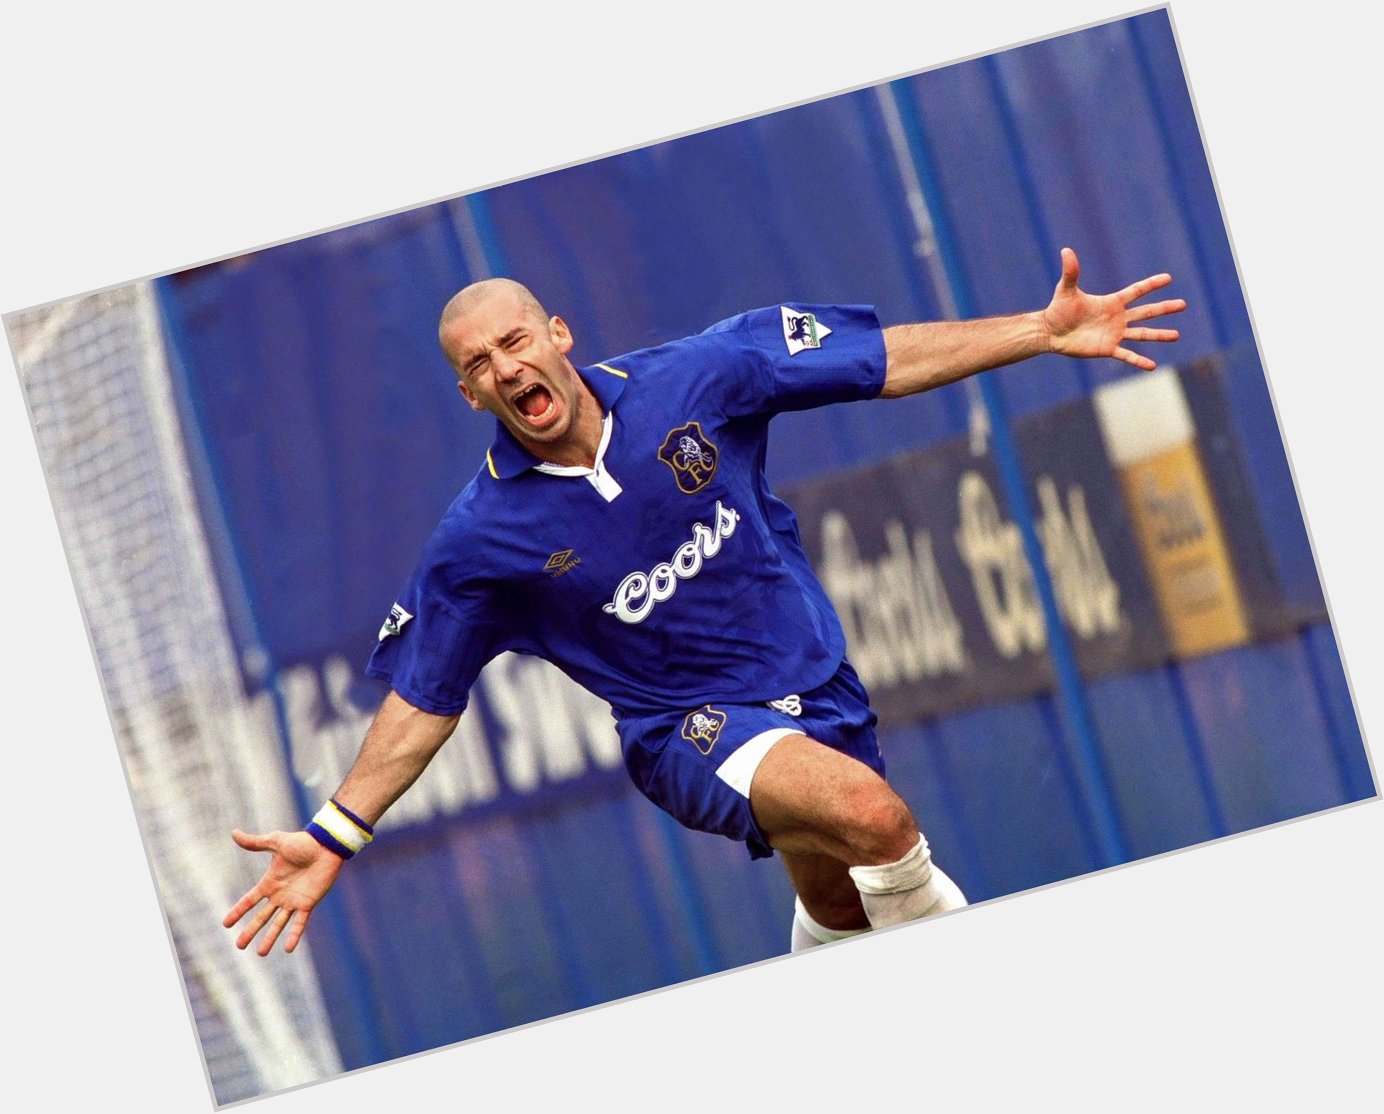 Happy birthday to former Chelsea player and manager Gianluca Vialli, who turns 55 today. 